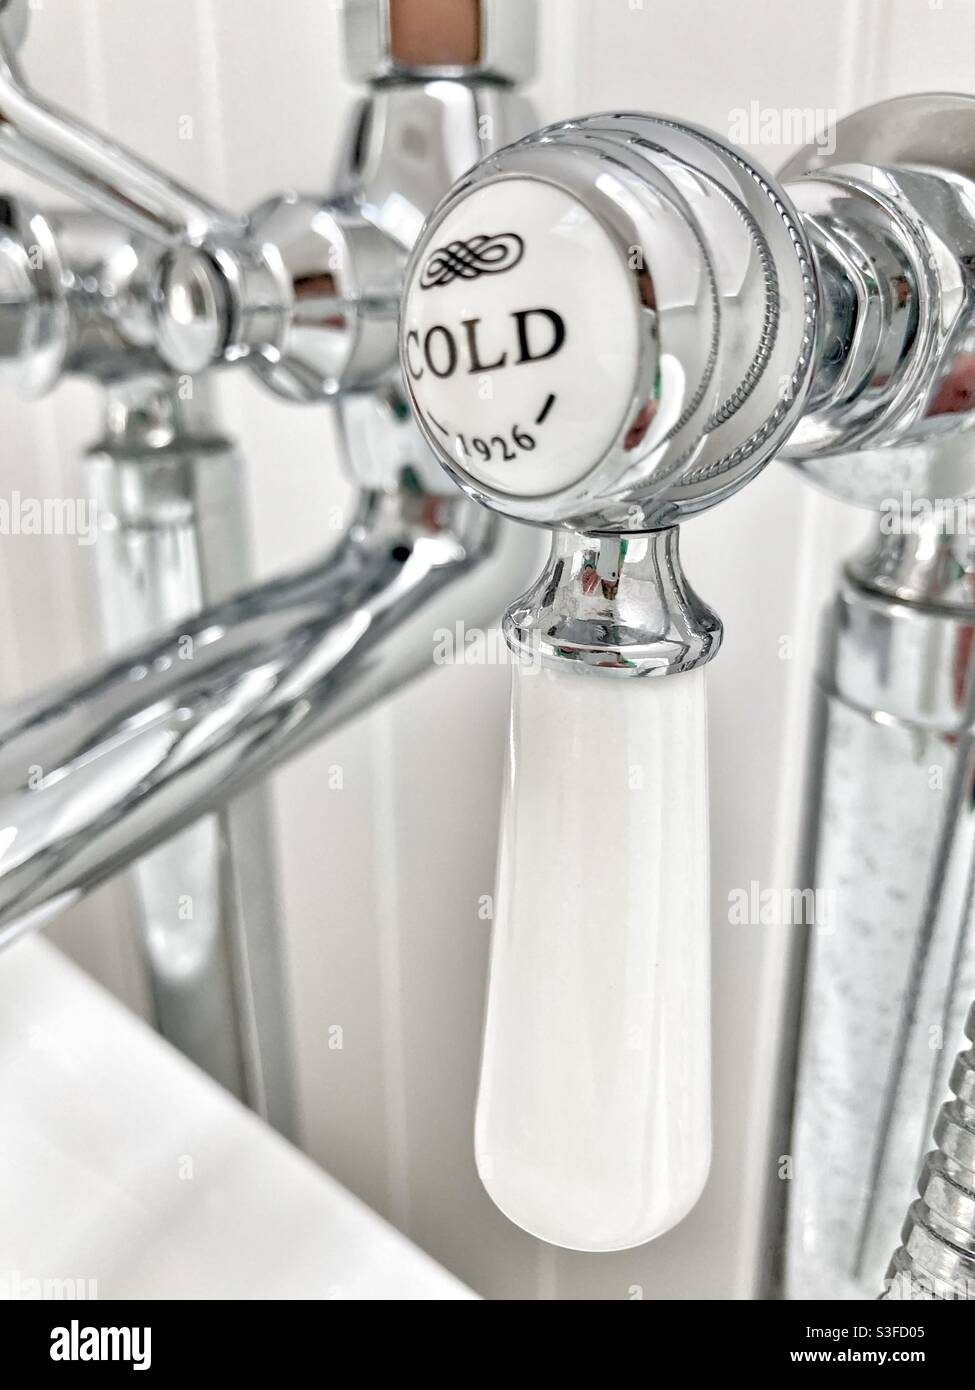 Cold tap / taps / water supply / bathroom / bath taps / faucets Stock Photo